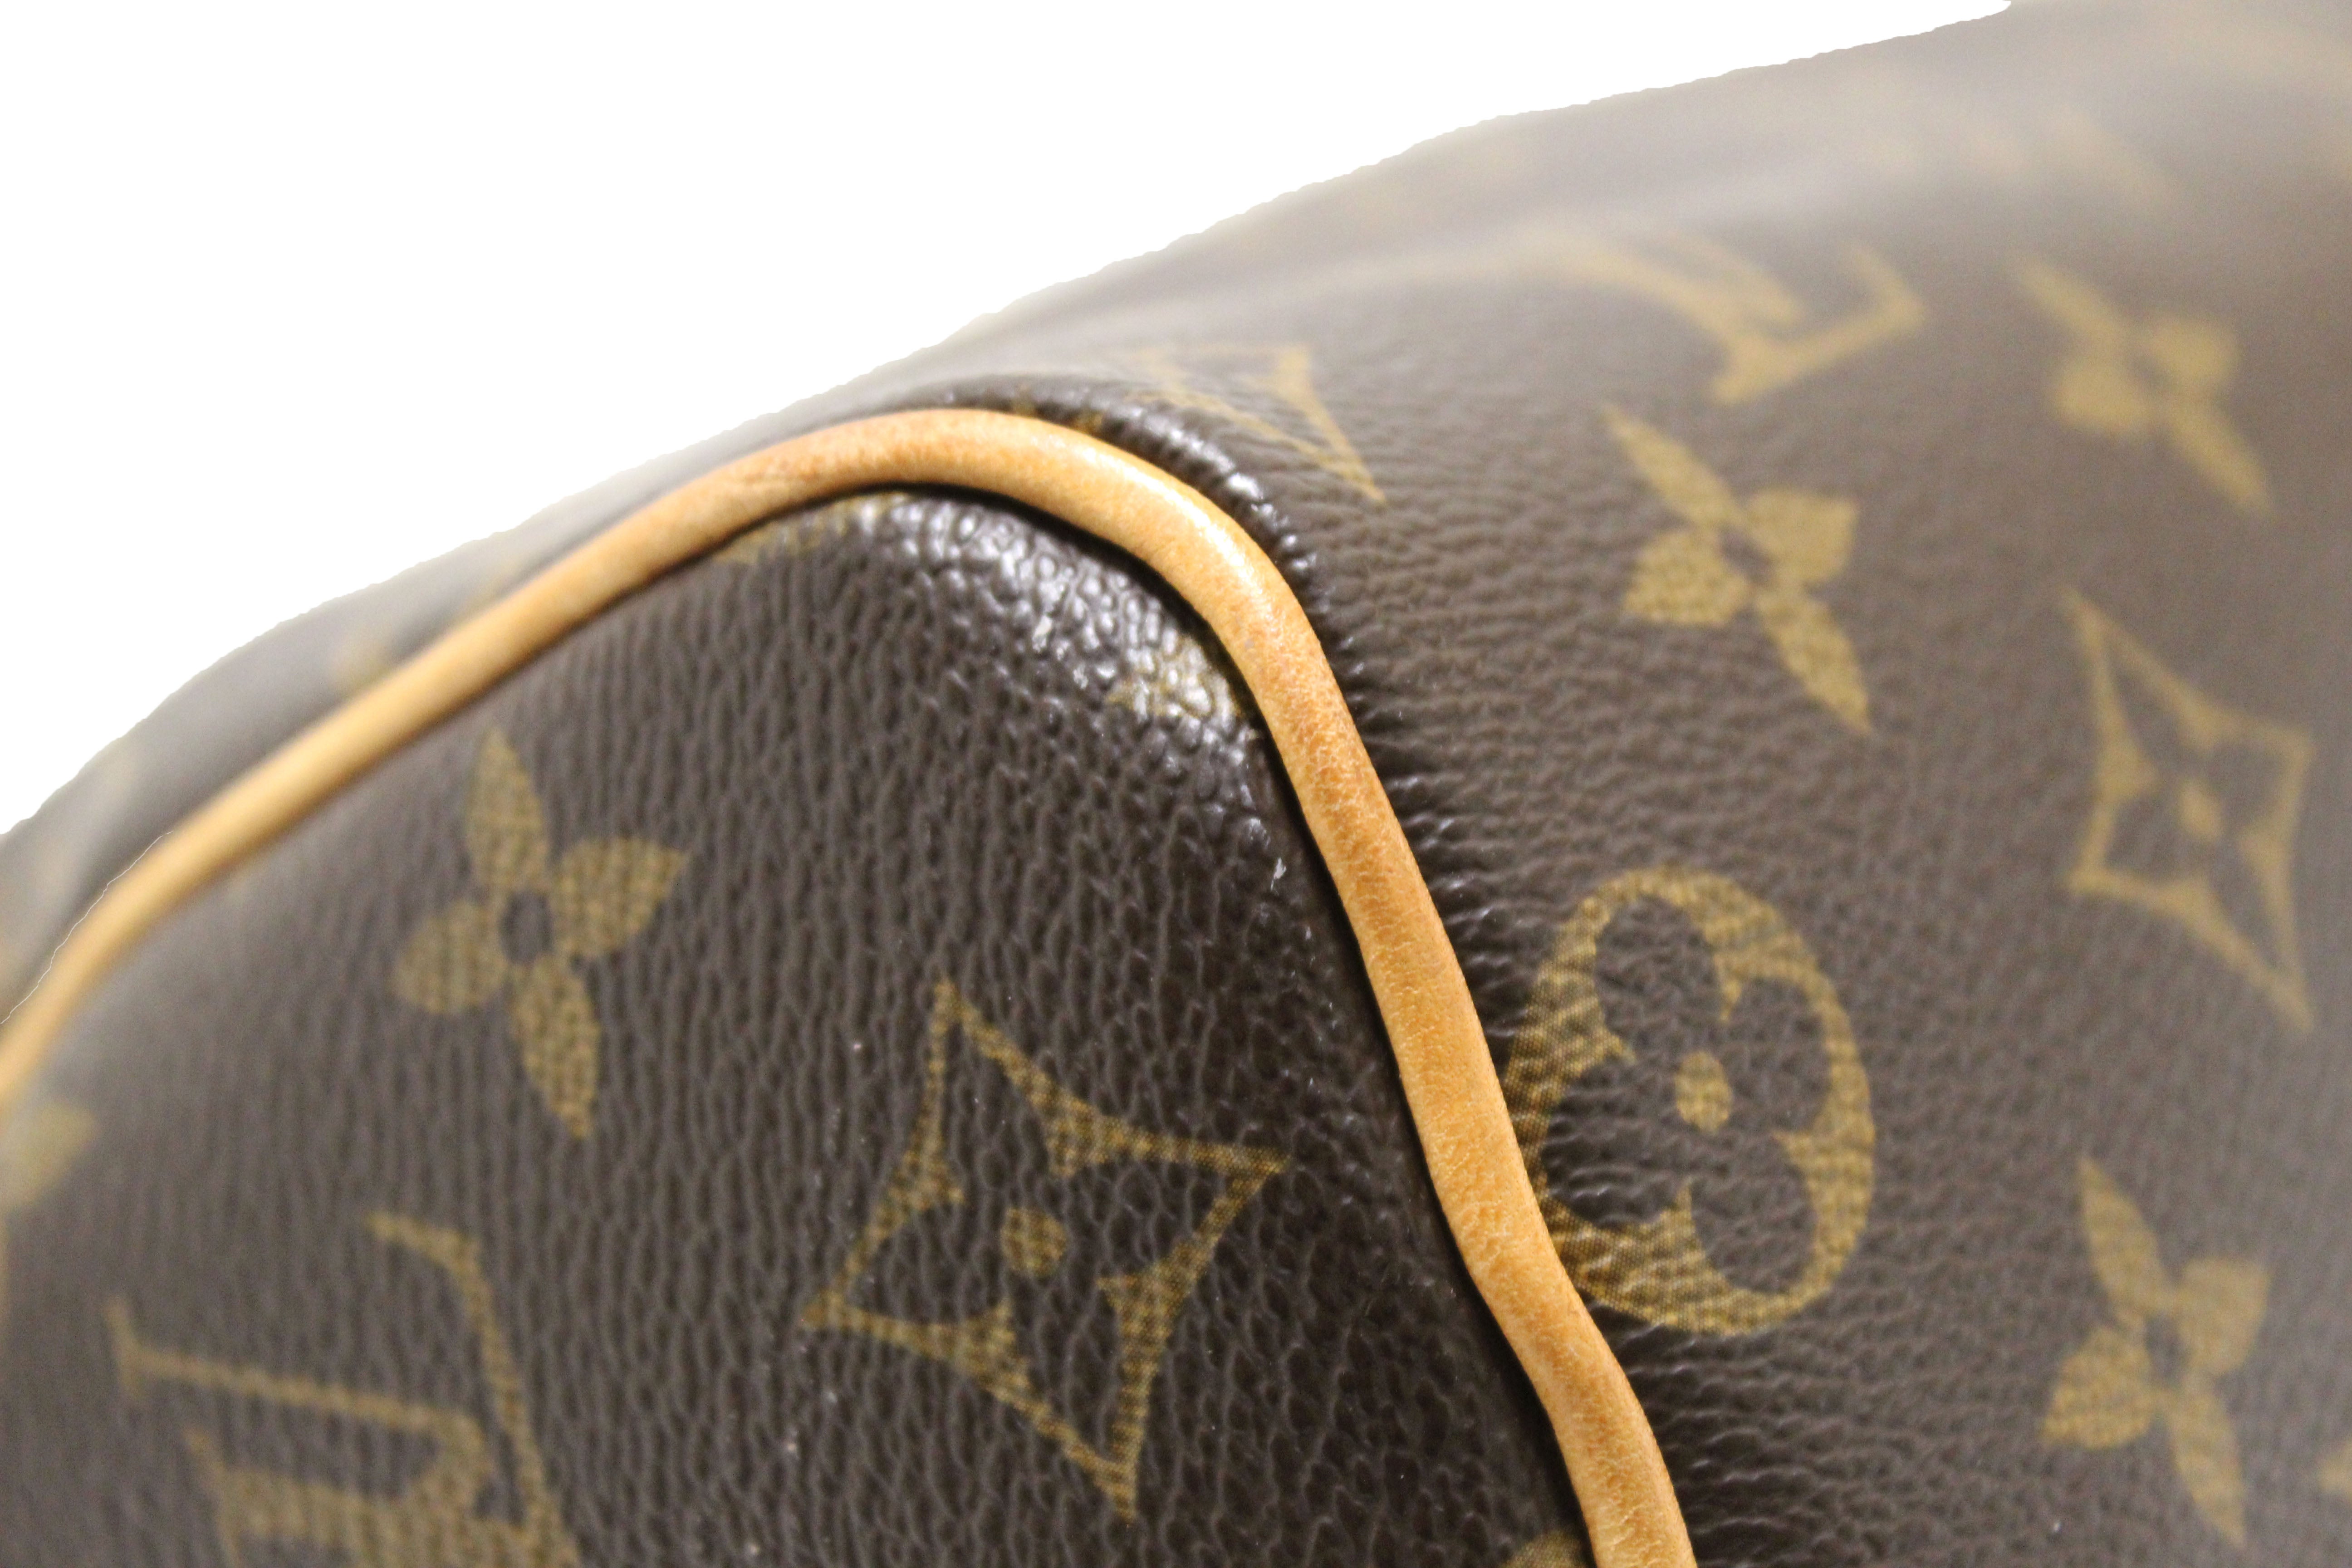 Save up to 70% on Louis Vuitton Authentic Pre-Owned Vintage